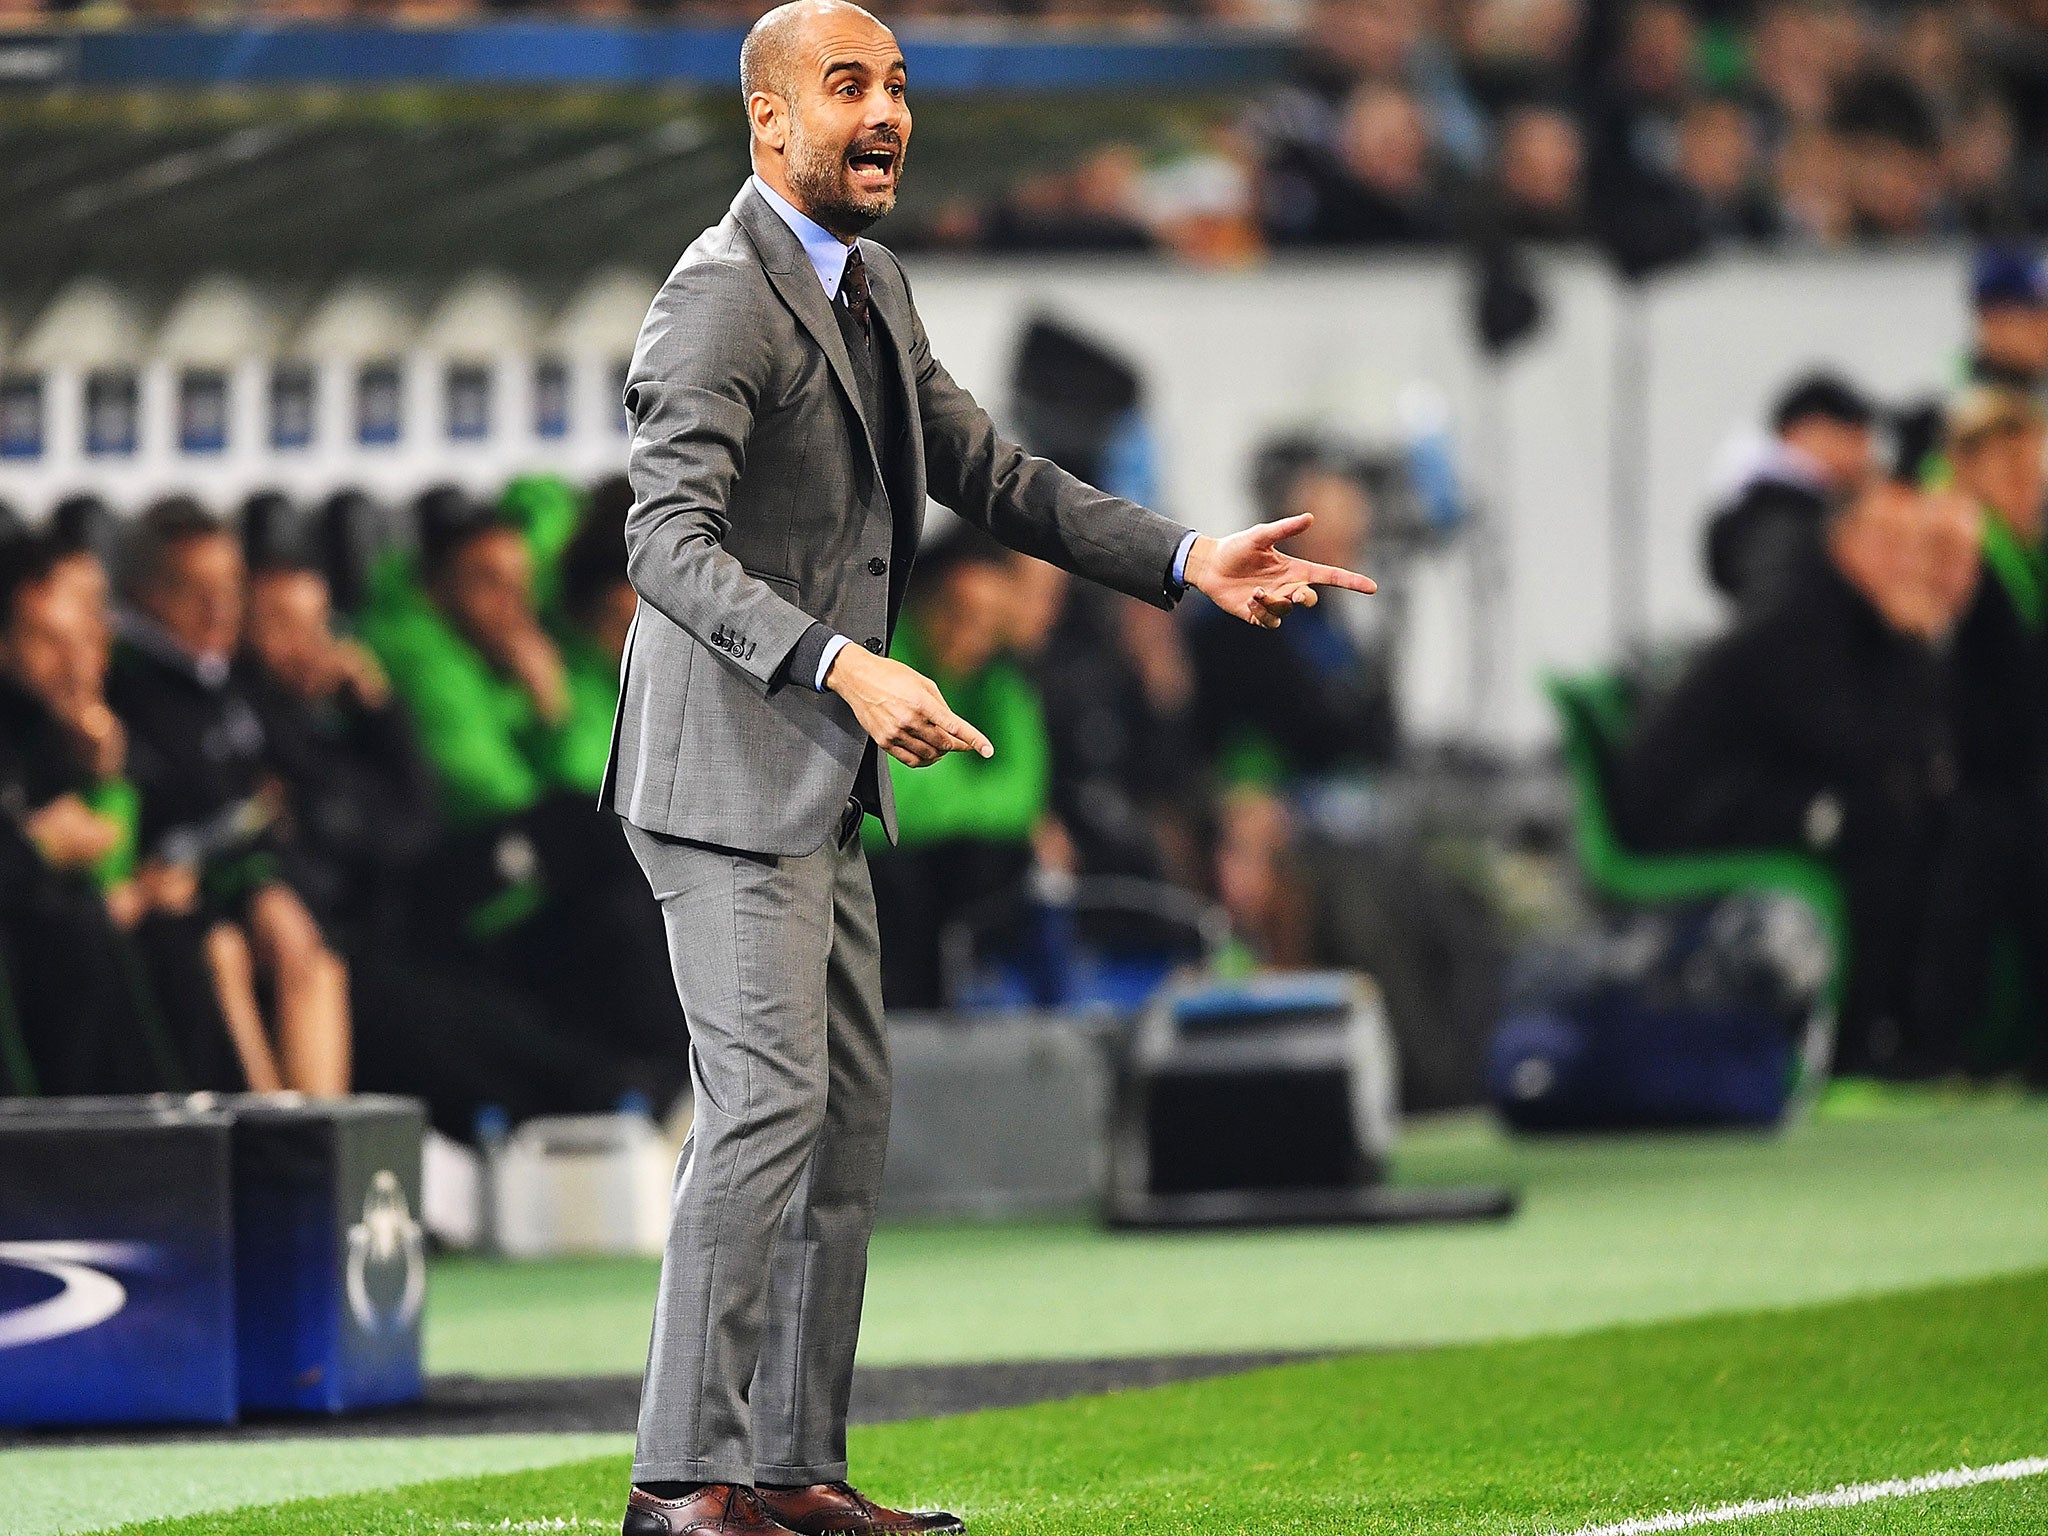 “My experience from playing in the Champions League for seven or eight years is that it is hard to win away,” Guardiola said after Wednesday's game